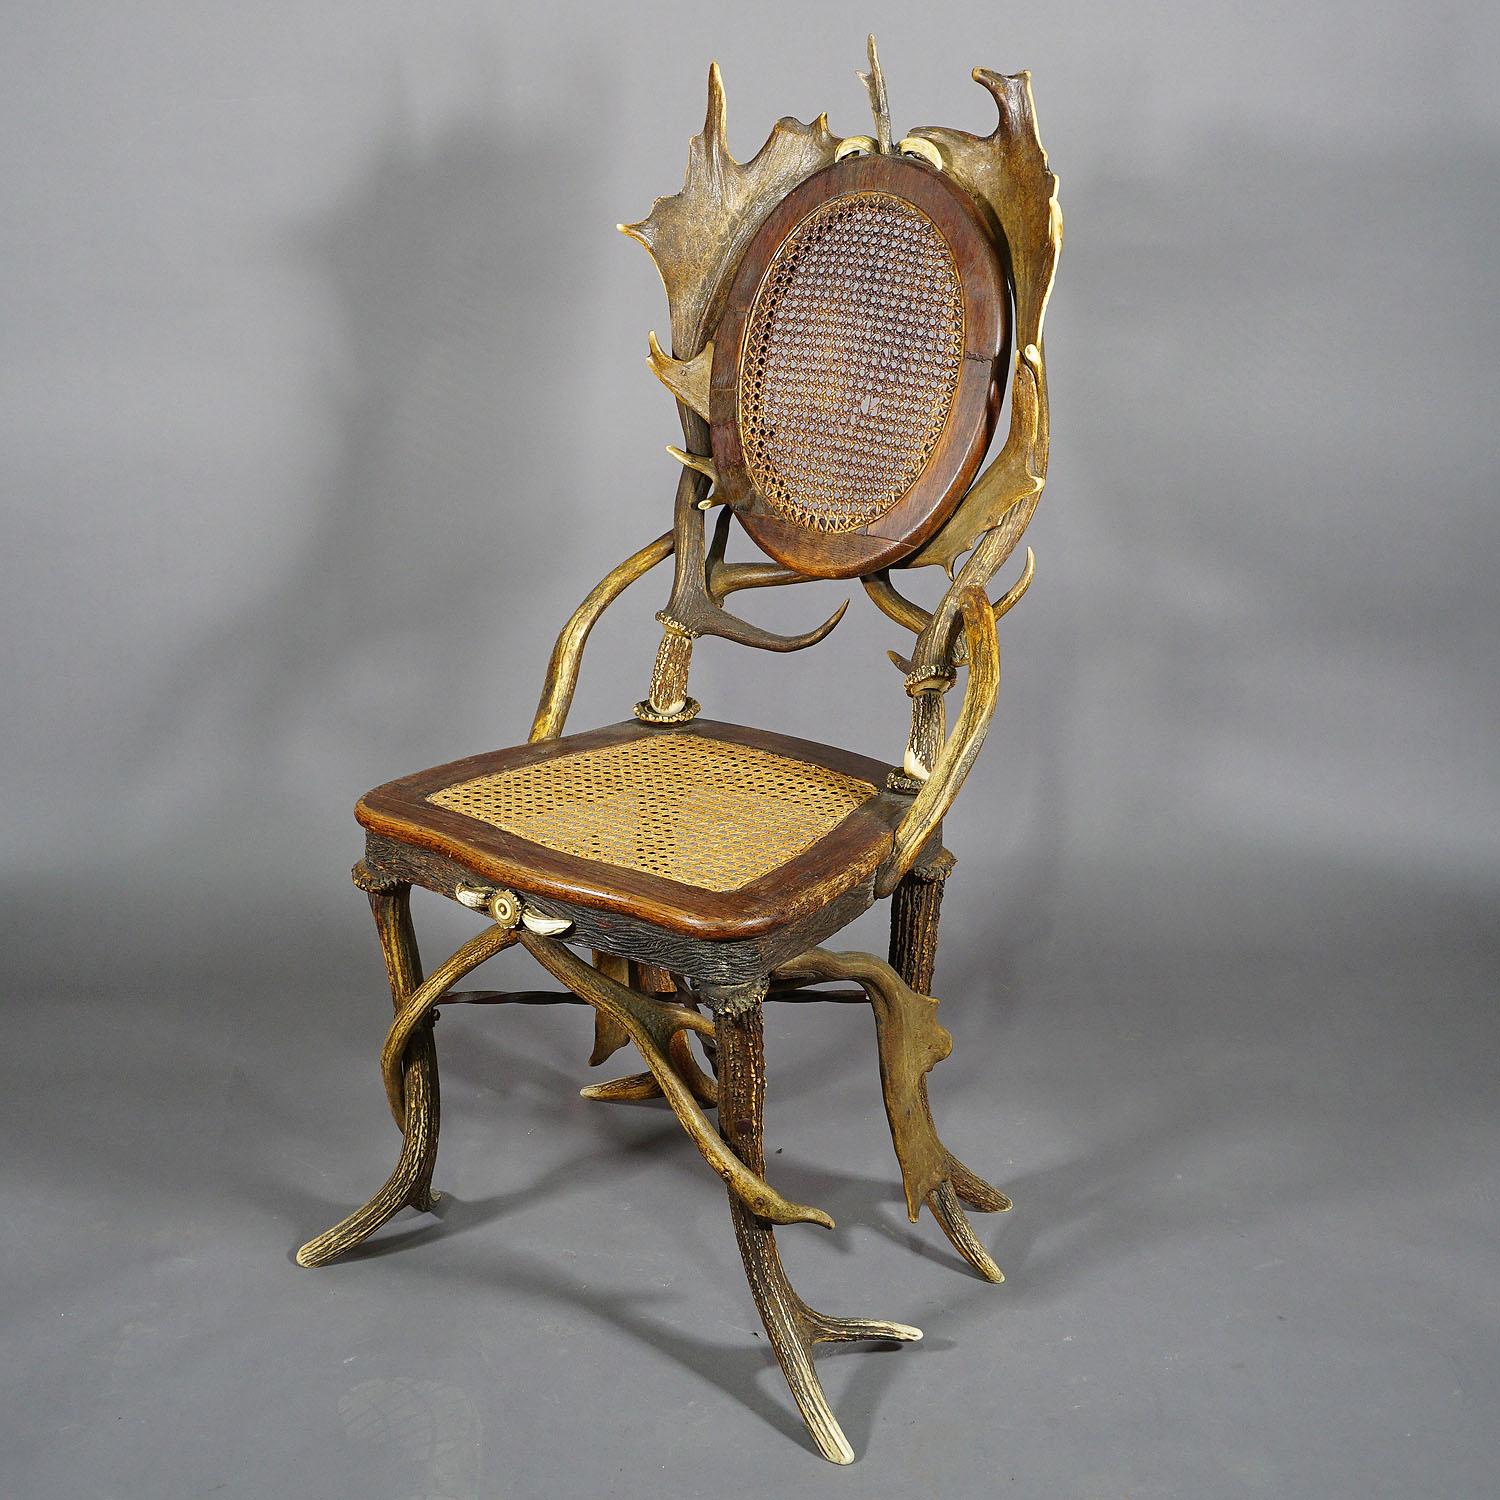 Pair of Antique Rustic Antler Parlor Chairs, Germany, circa 1900

A pair of antique antler chairs, made of antlers from the deer and fallow deer. They are decorated with a turned horn rose and wildboar tusks. The seat and backrest are made of oak